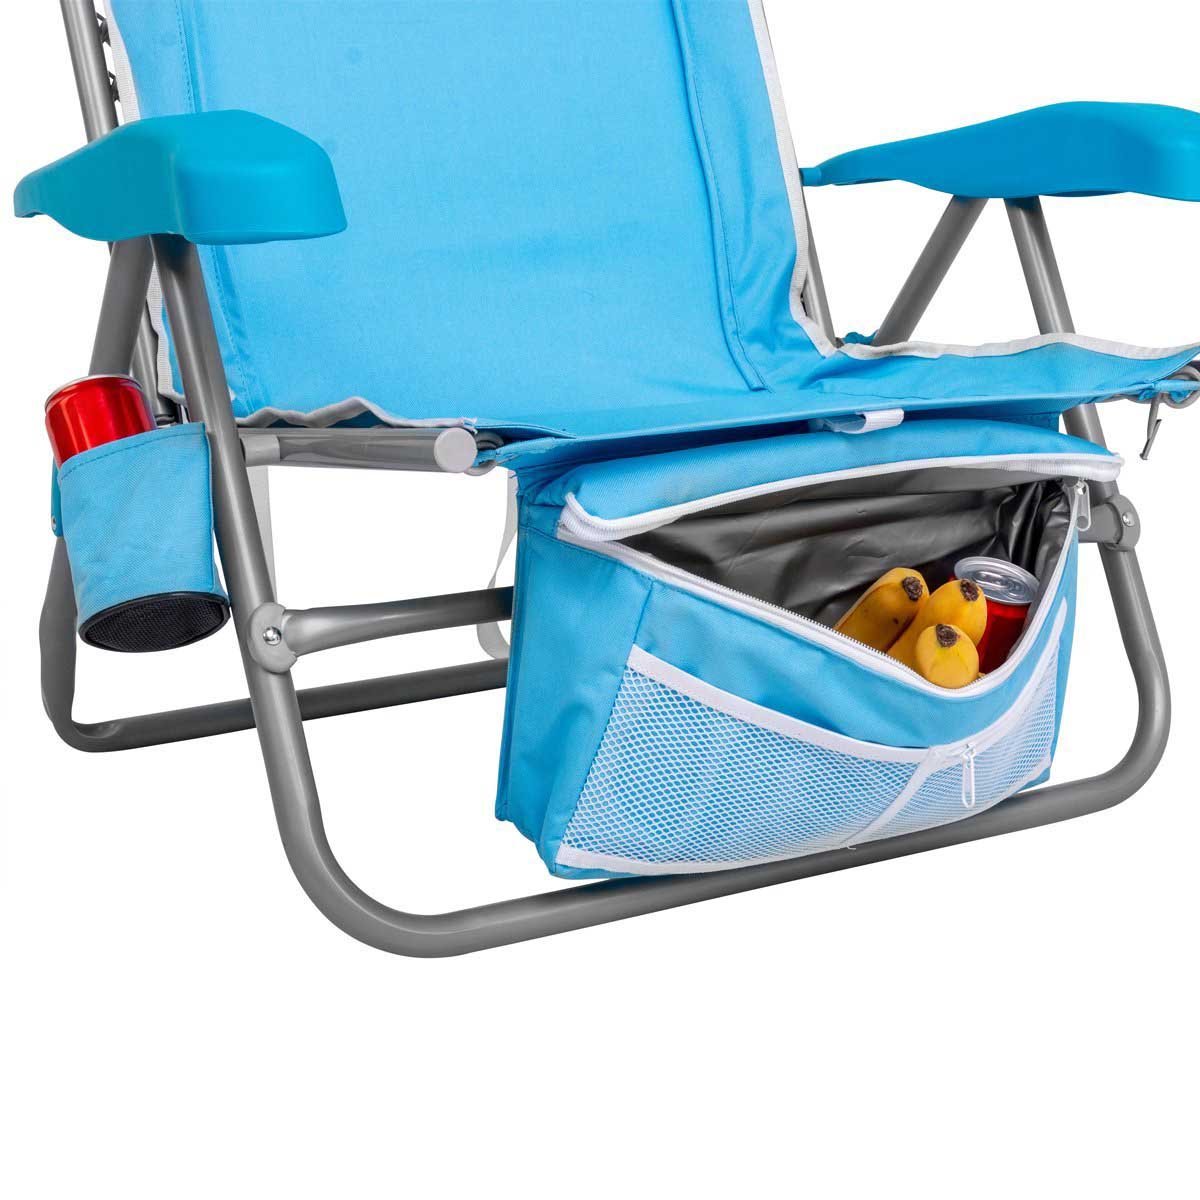 Premium Backpack Beach Chair's Cooler Bag is spacious enough tohold your food and beverages